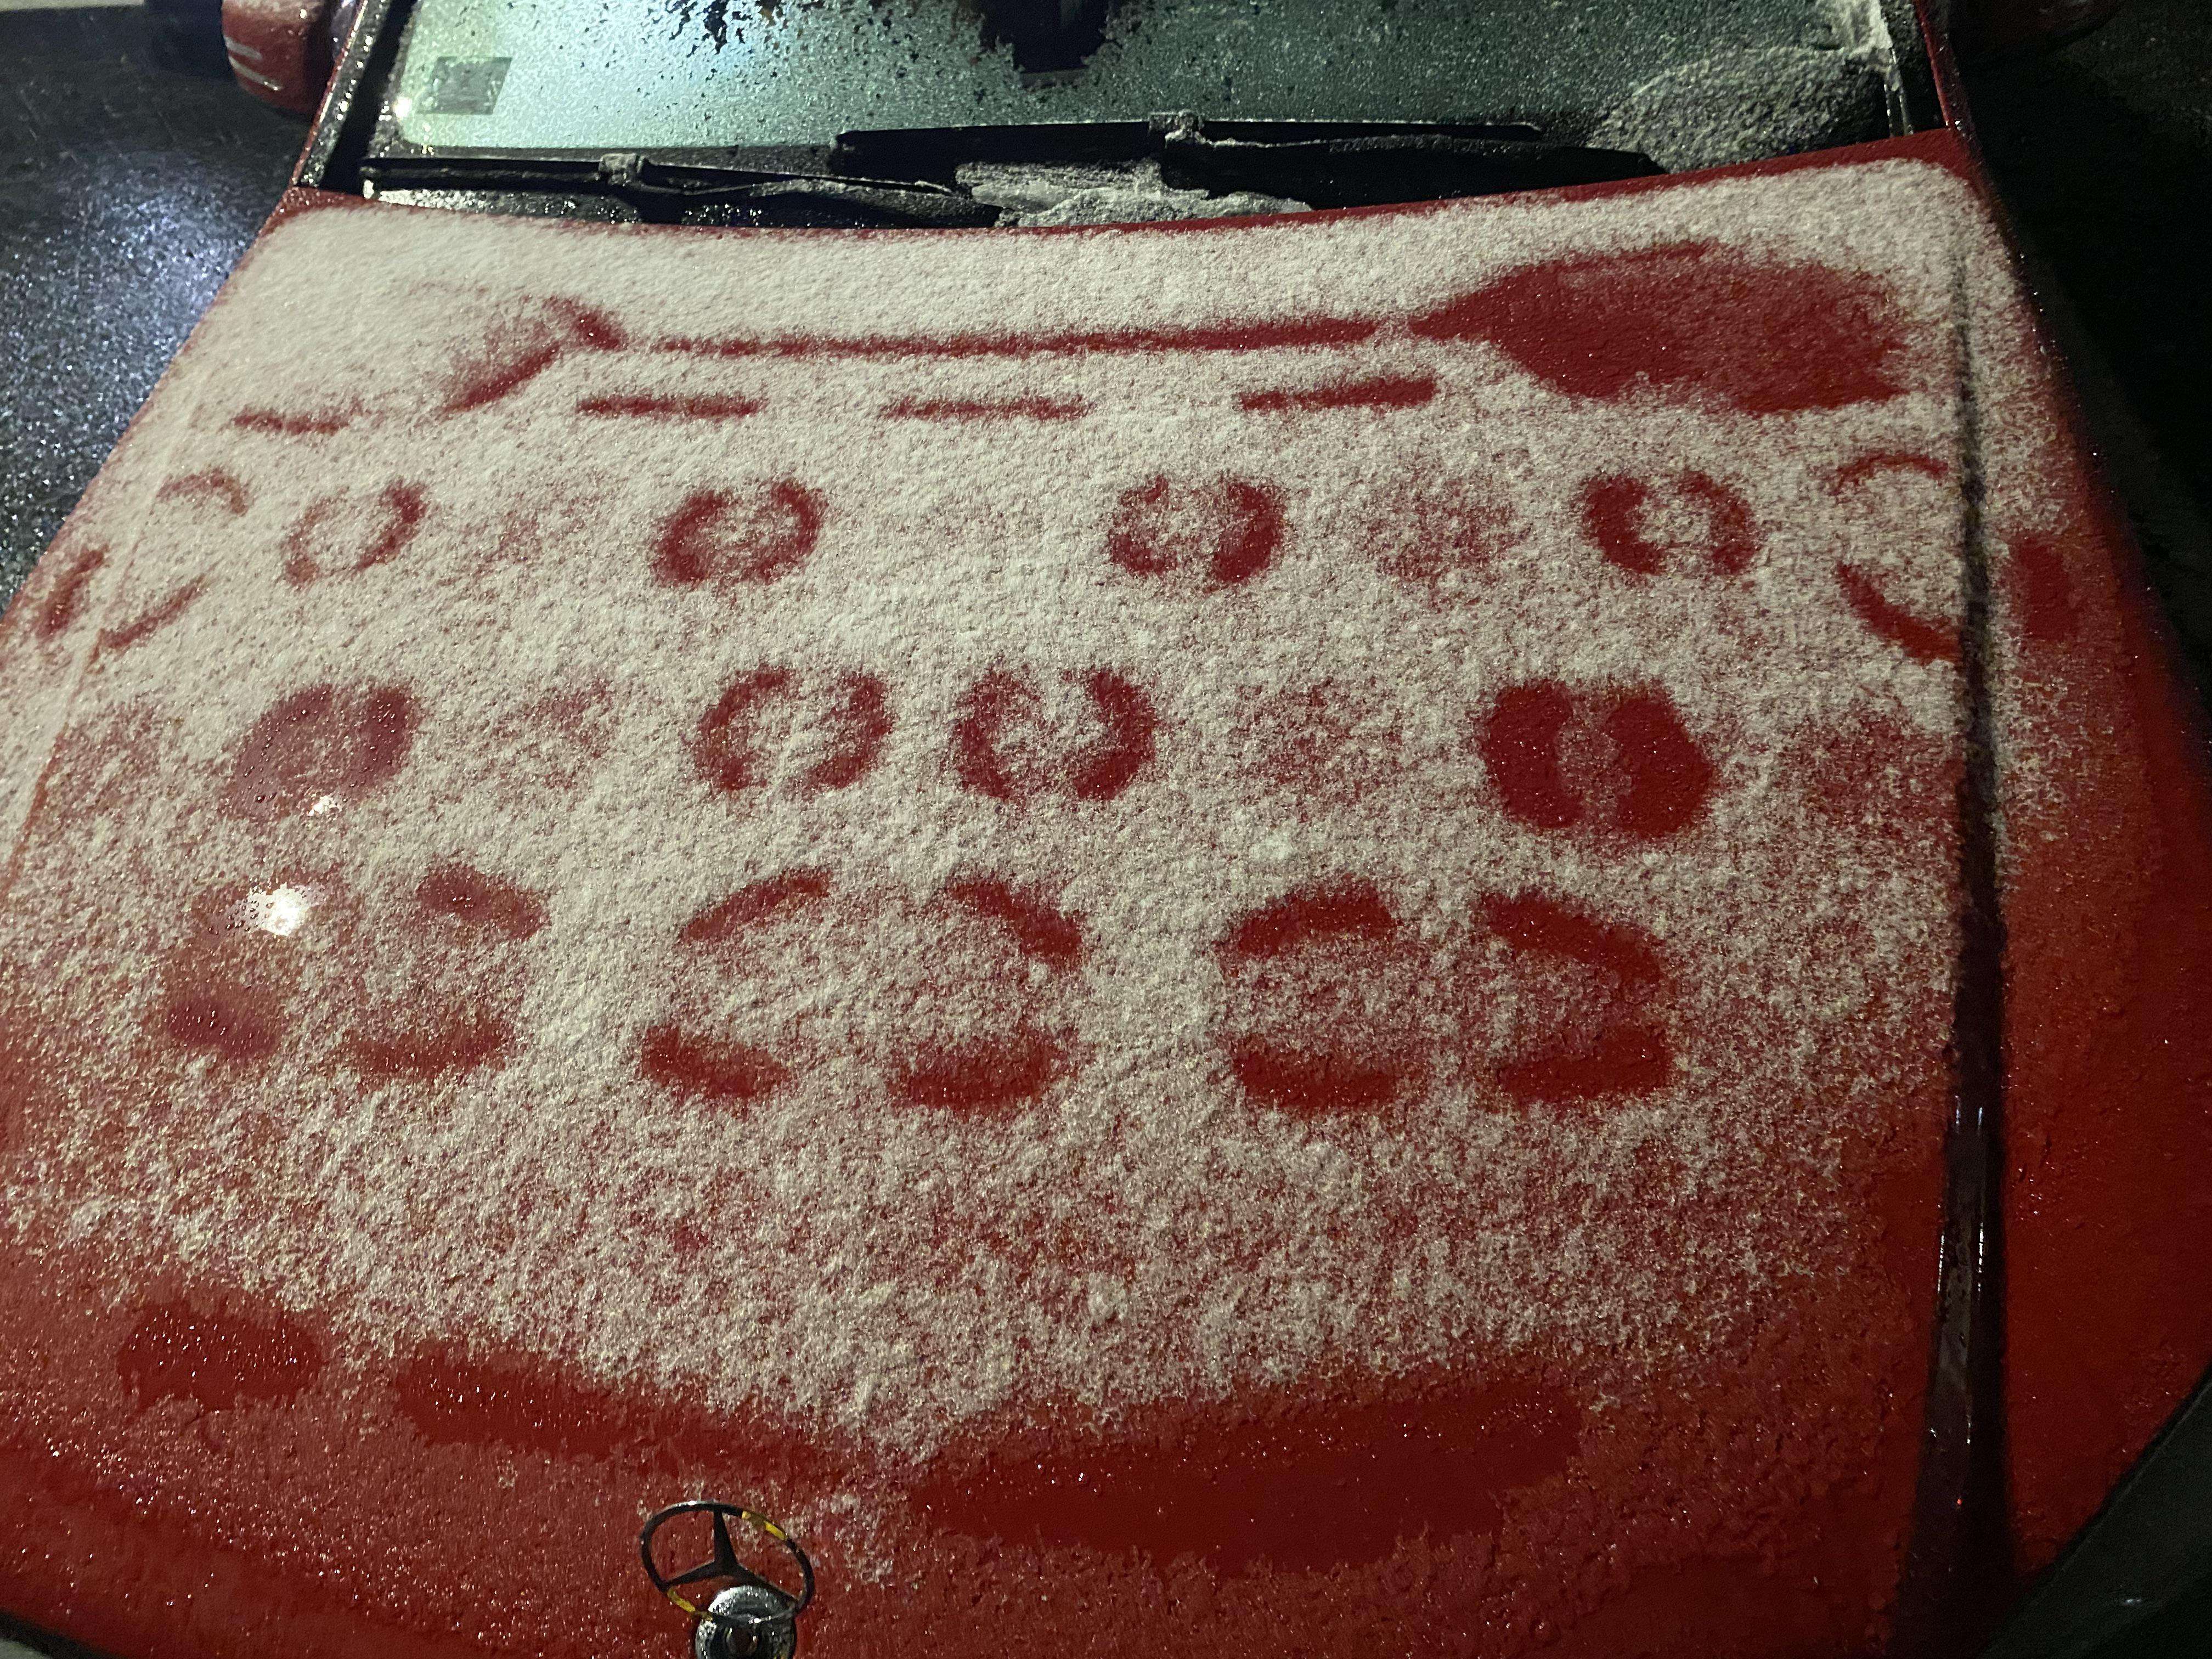 image showing Went to the store during a snowstorm, came back to these weird patterns on the hood of my car